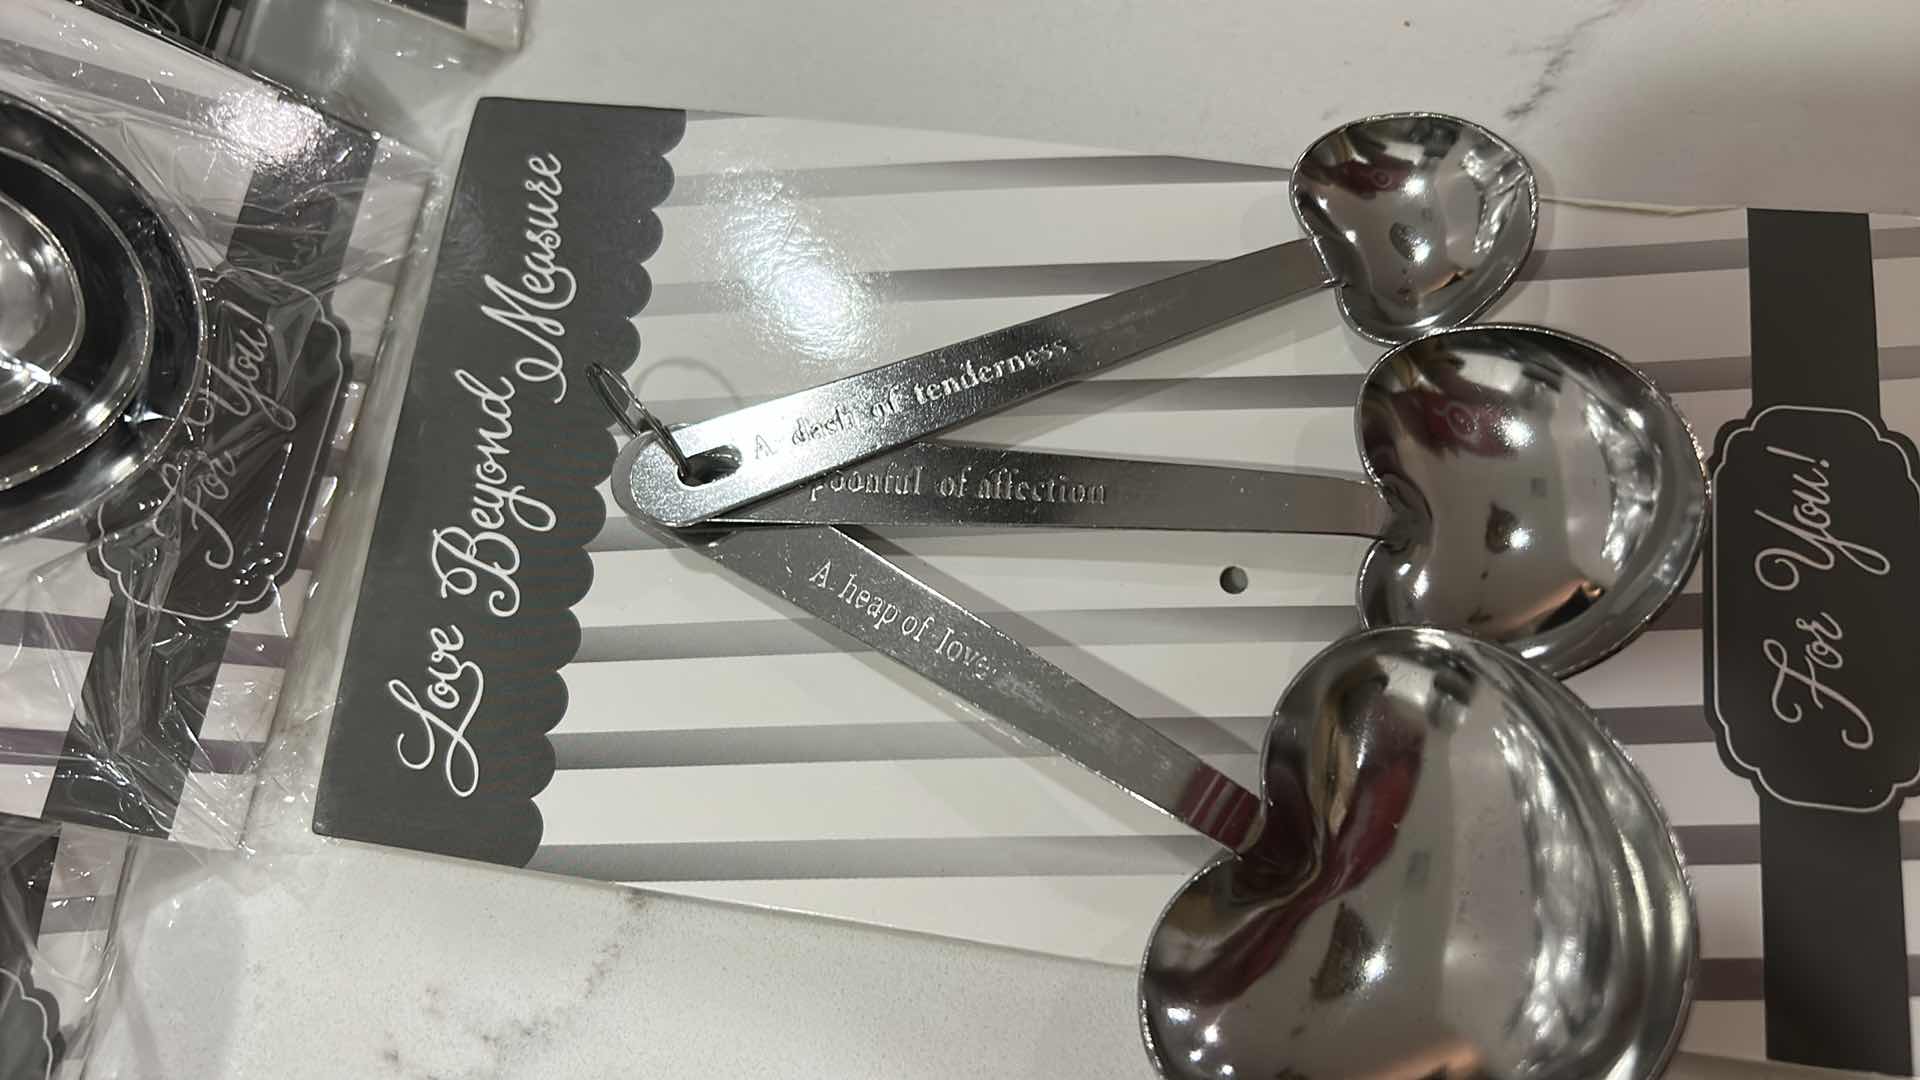 Photo 2 of 12 NEW “LOVE BEYOND MEASURE” MEASURING SPOON SETS, A DASH OF TENDERNESS, A SPOONFUL OF AFFECTION AND A HEAP OF LOVE